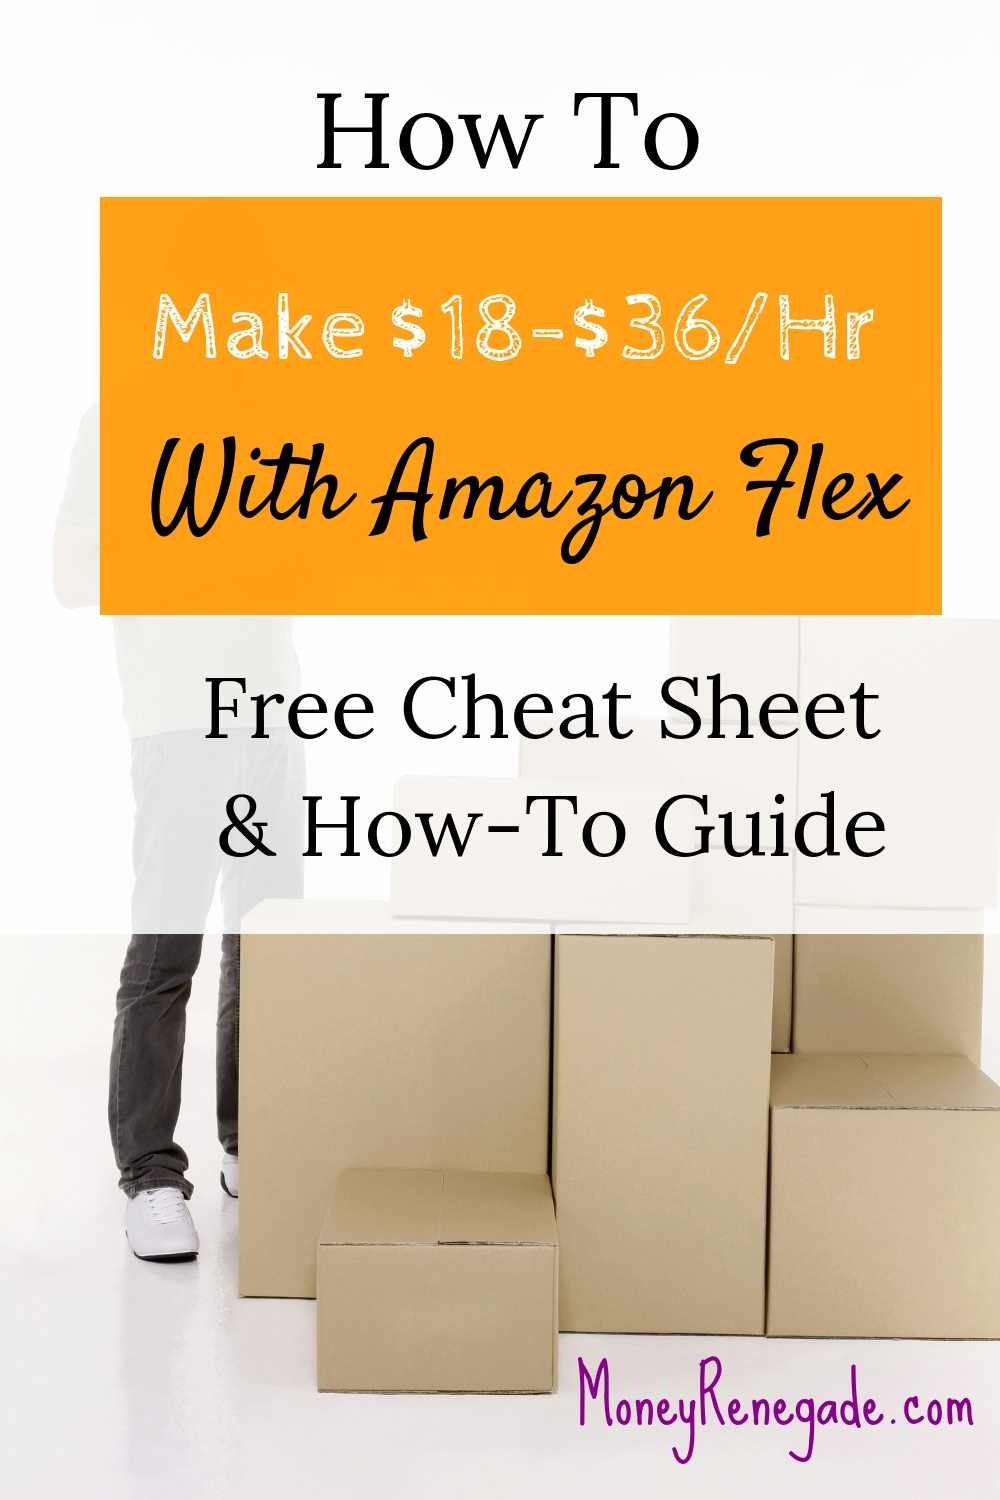 Definitive How To Make 1836/Hr With Amazon Flex Money Renegade